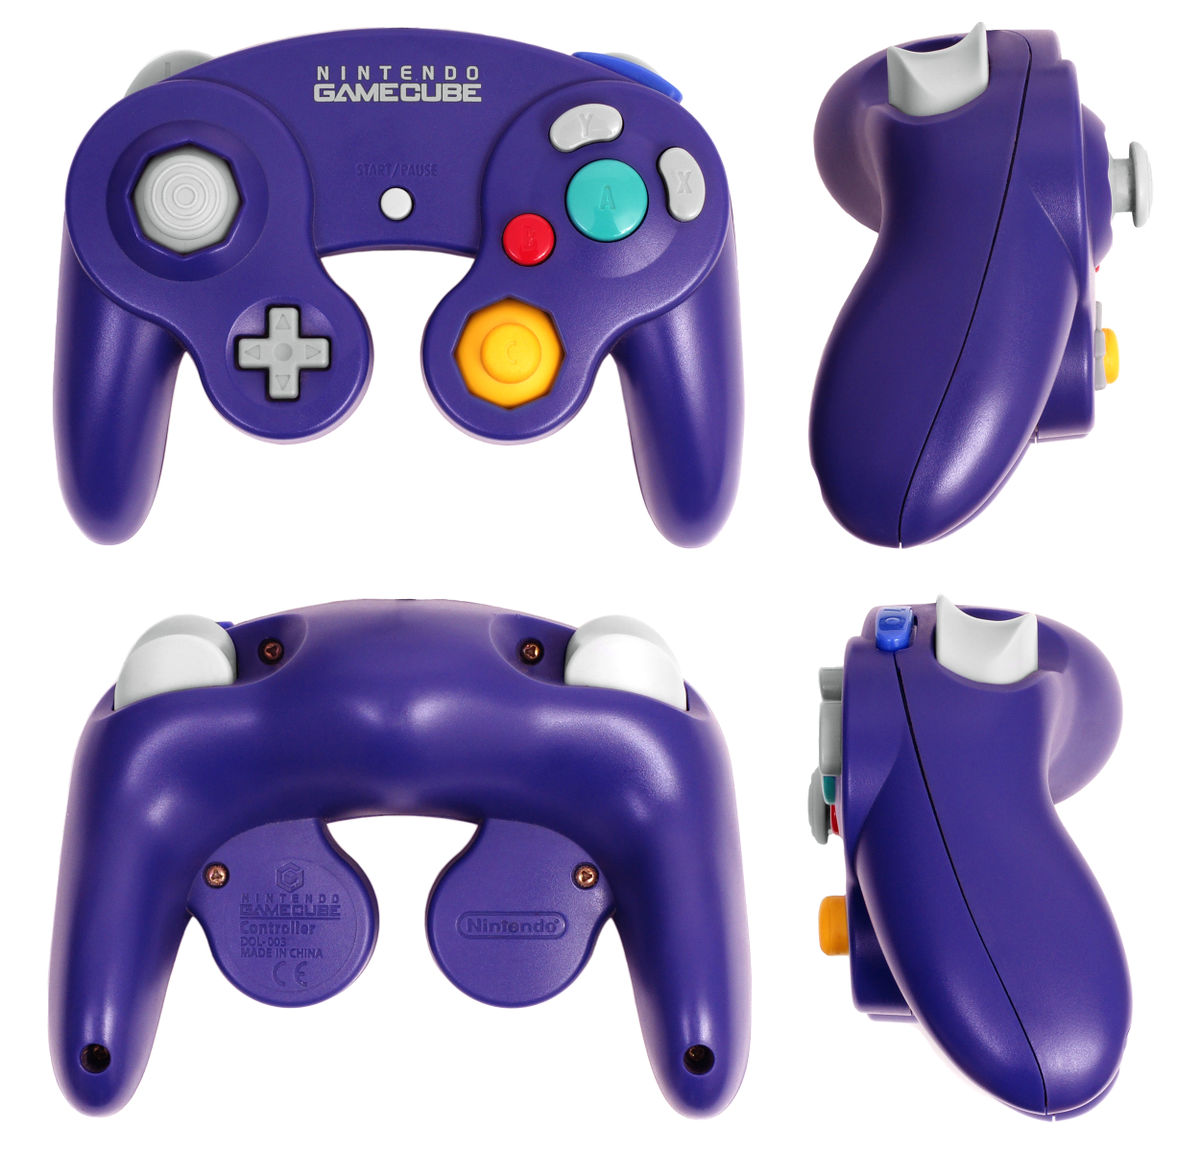 where to buy original gamecube controllers